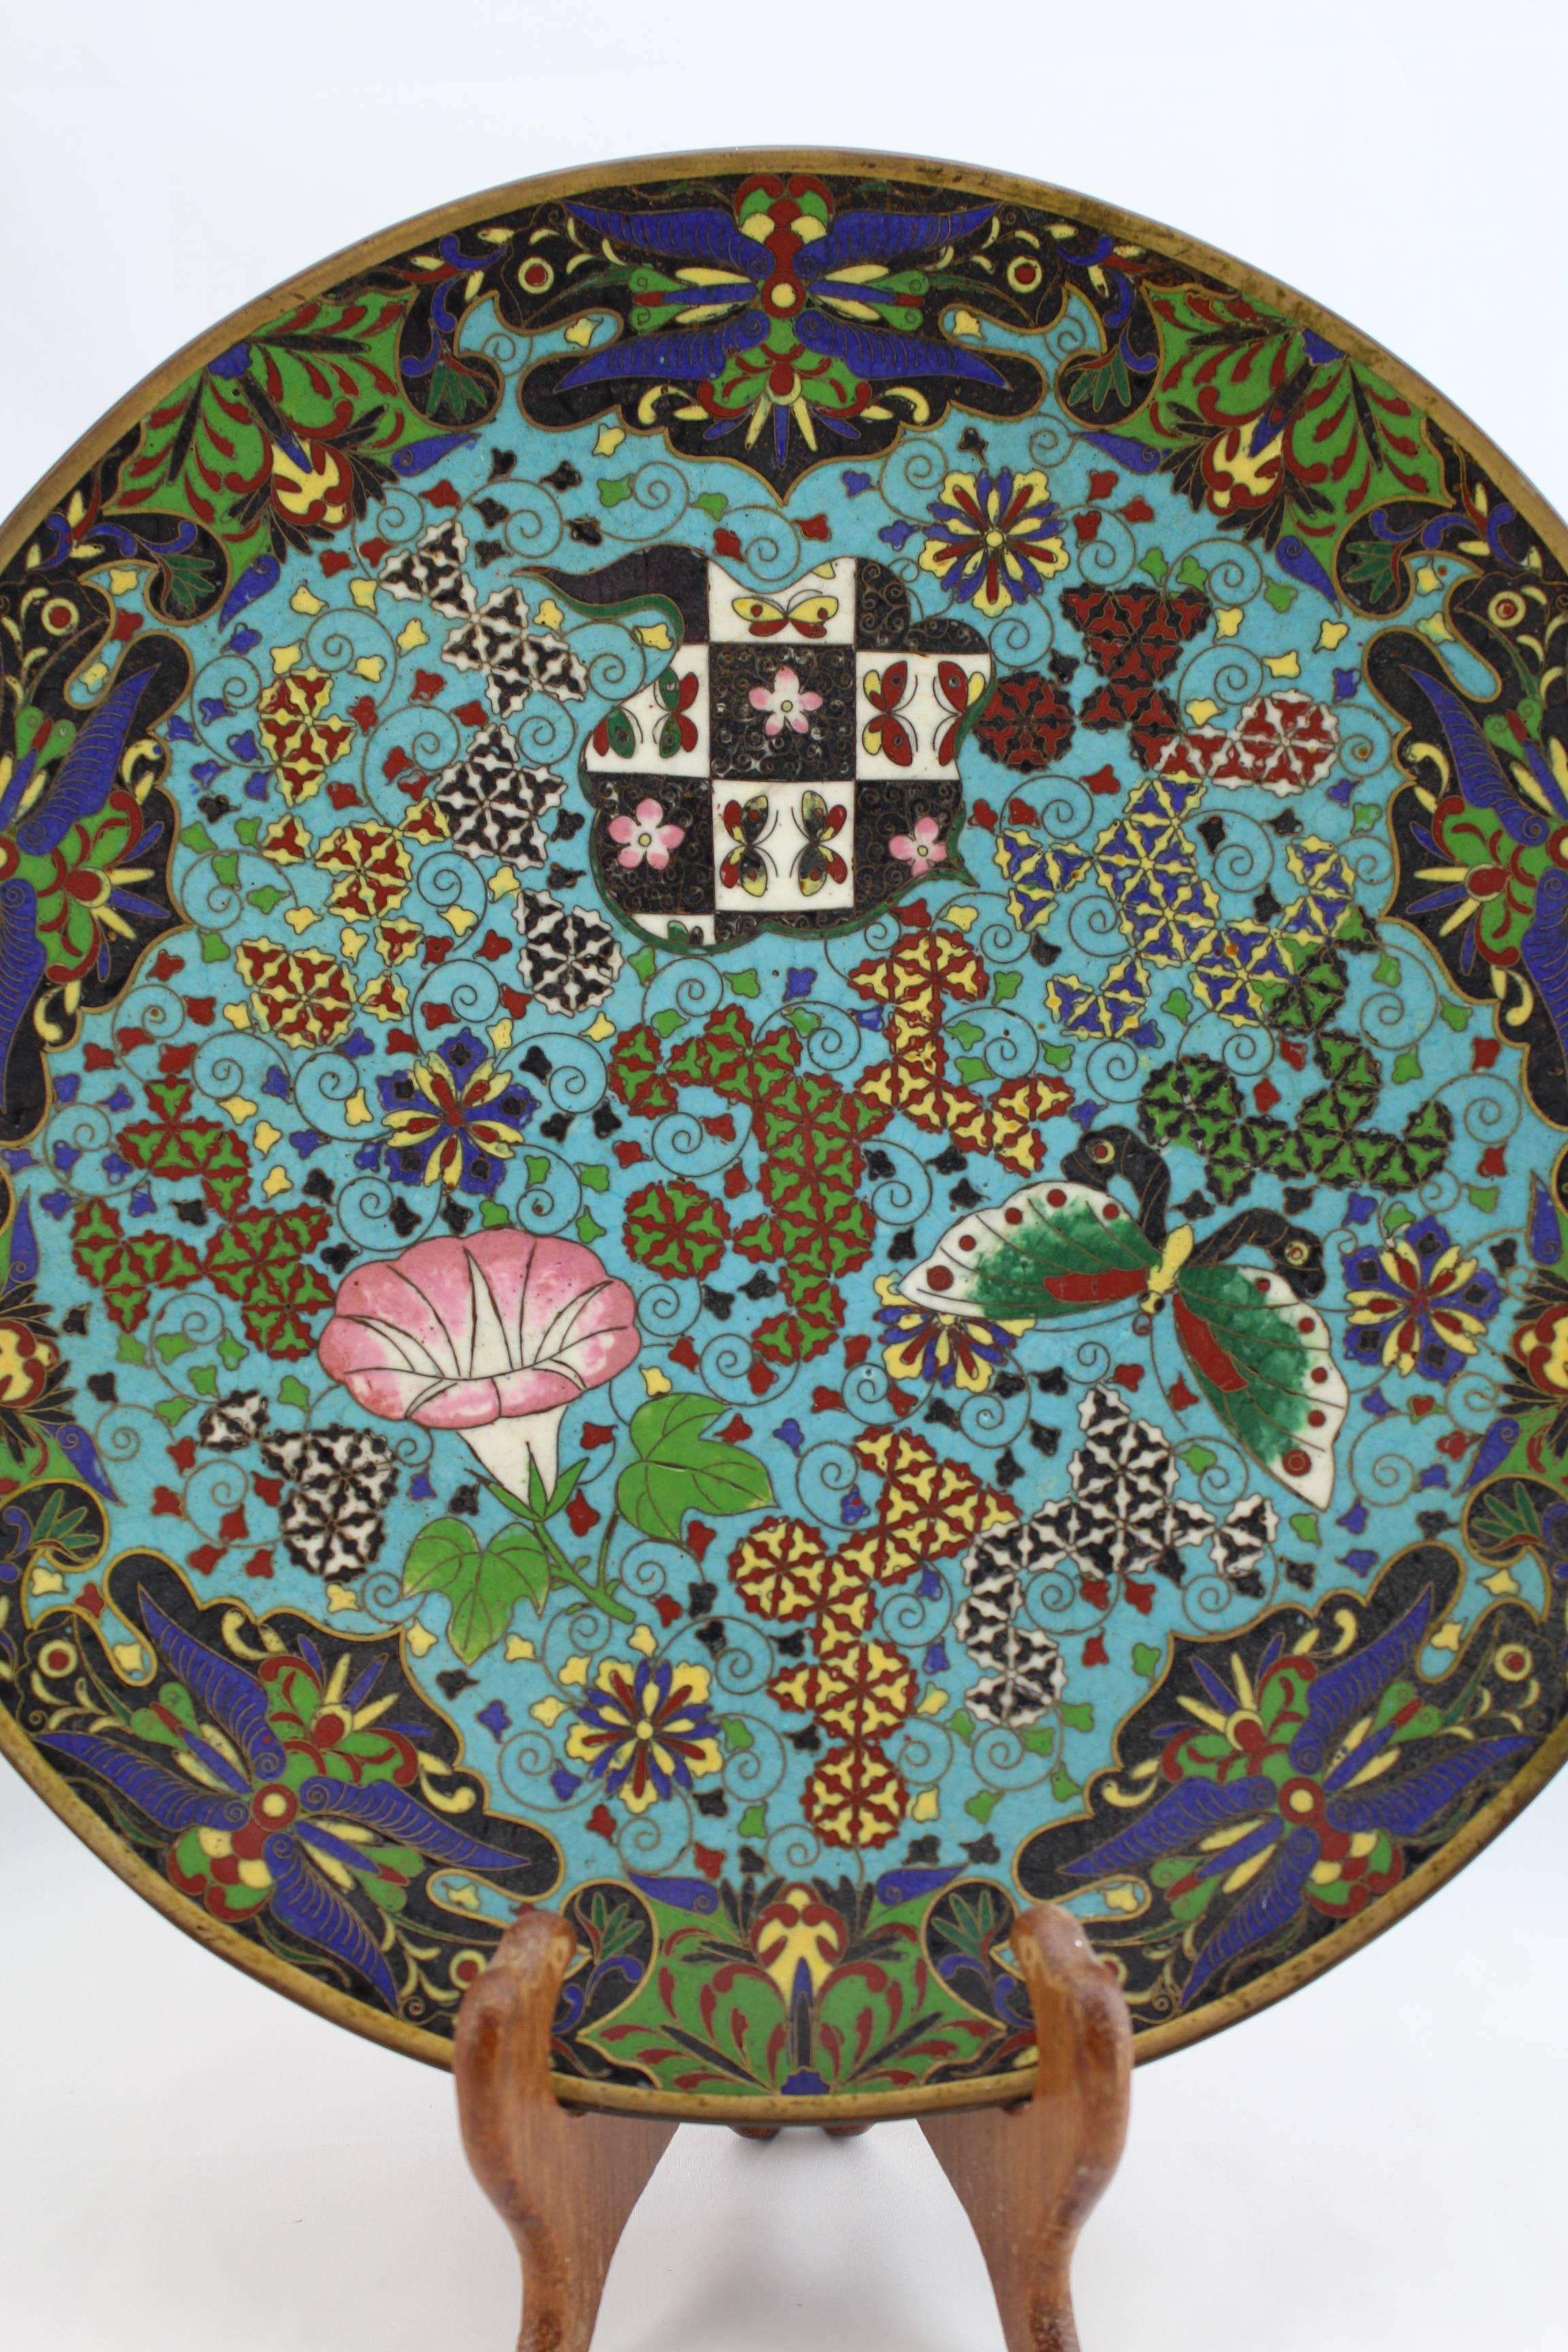 Japanese antique Meiji period cloisonné́ charger.
This cloisonné́ is intricate and masterfully executed representing three scenes. One scene is of a checkered black and white stingray with butterflies and flowers. The second scene depicts pink